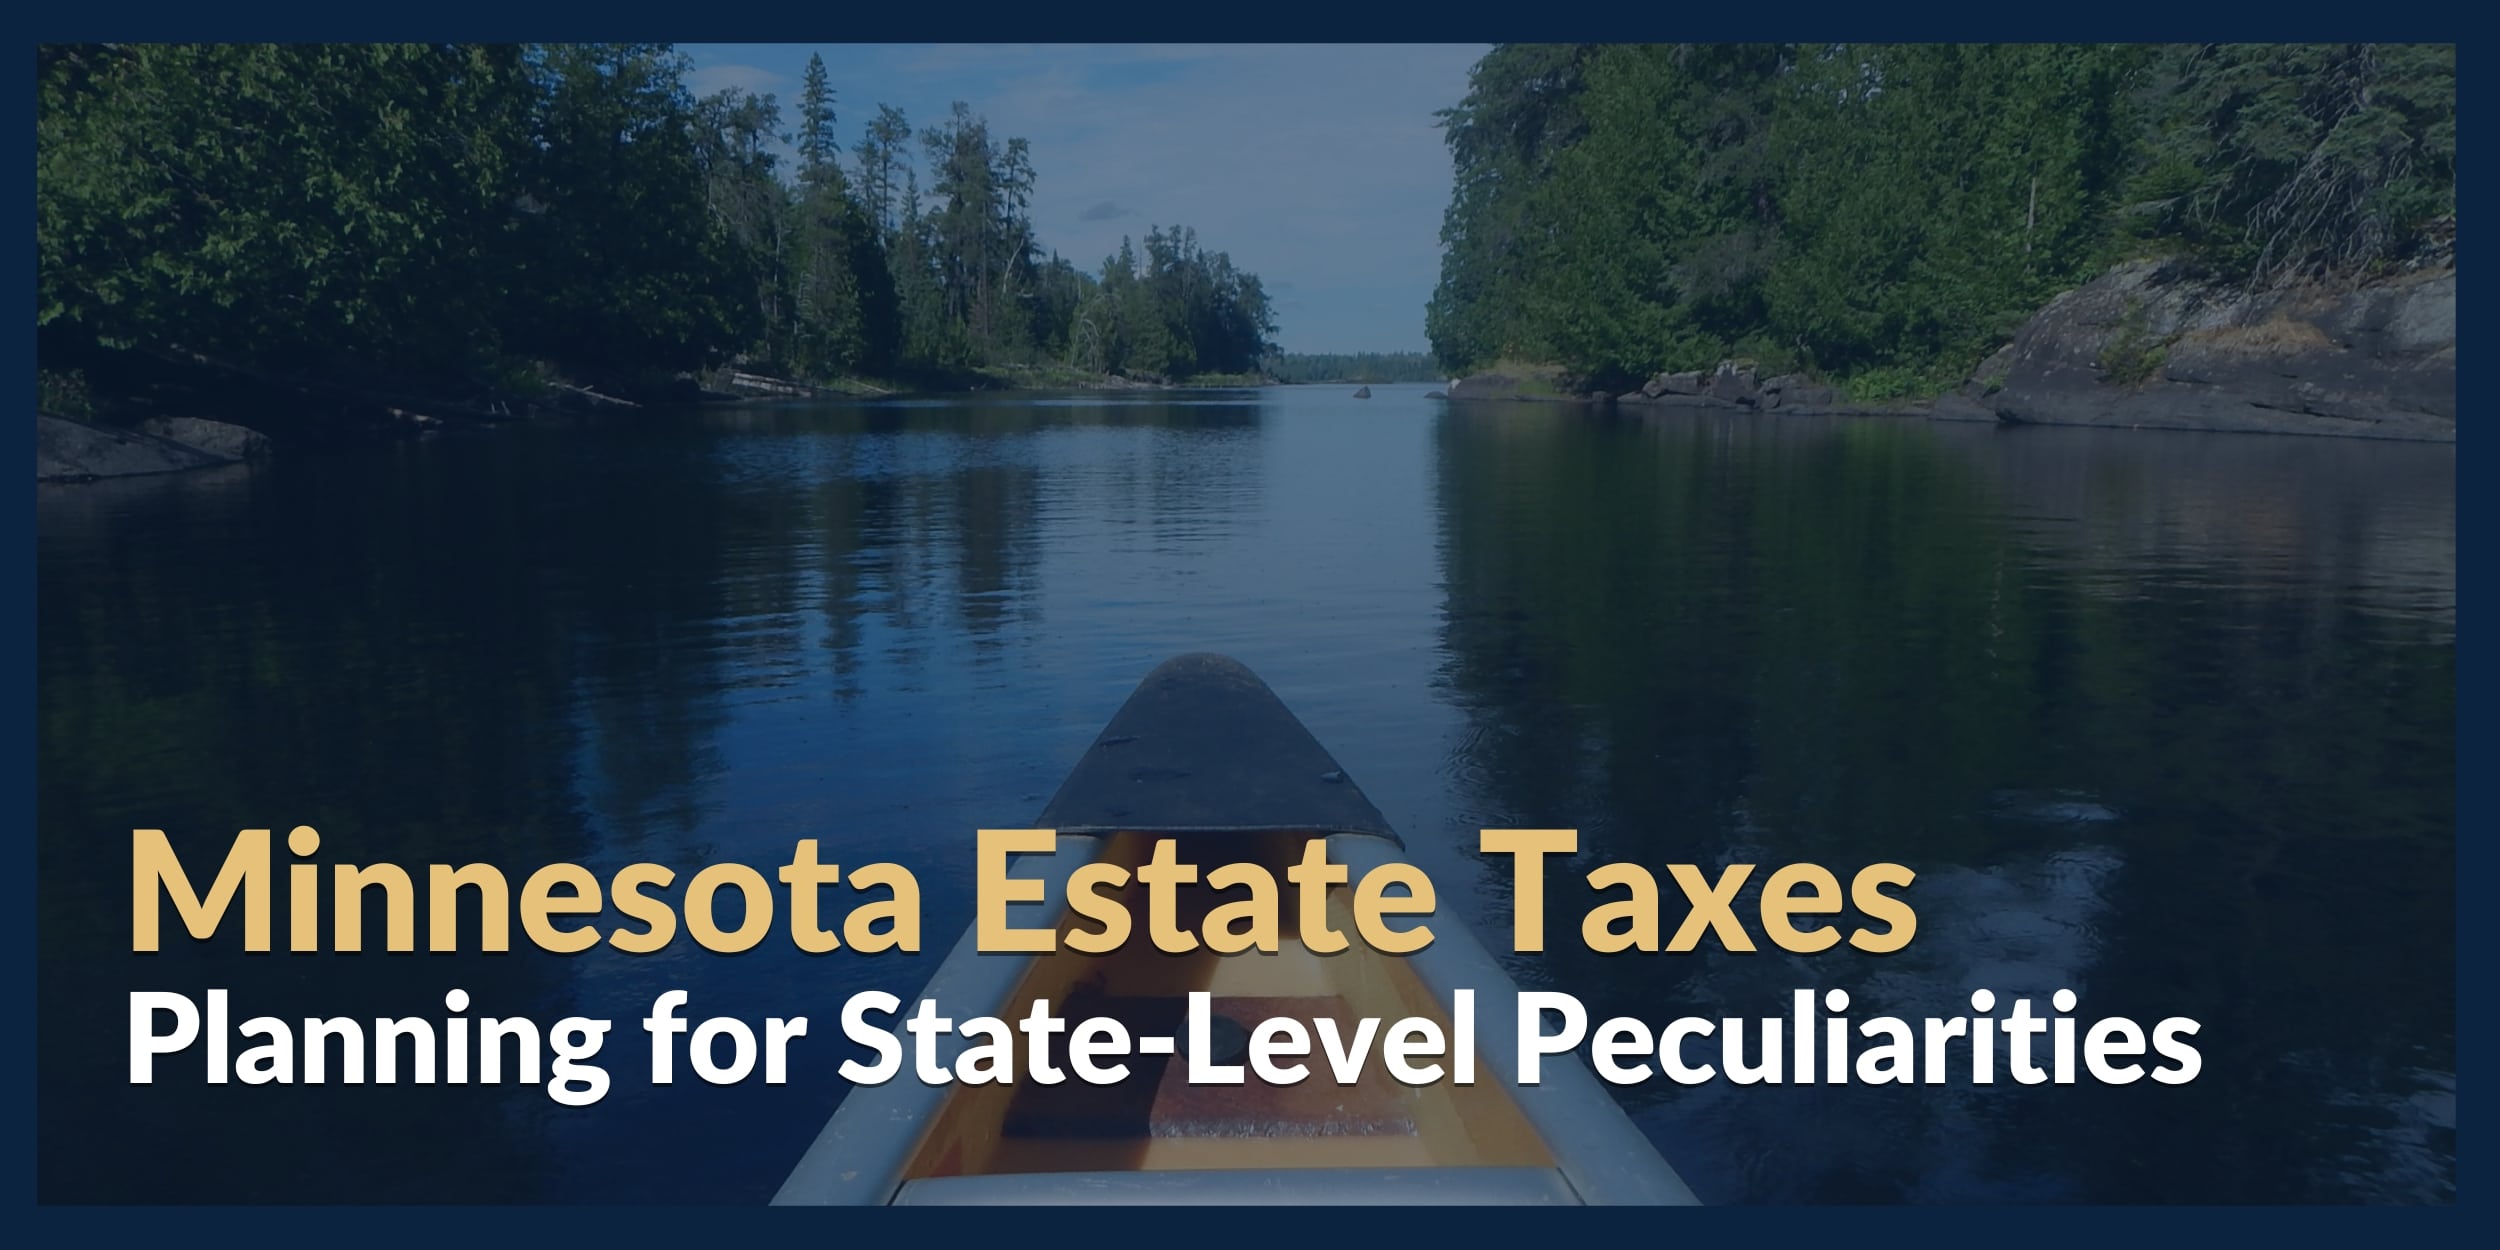 Minnesota Estate Taxes – Planning for State-Level Peculiarities